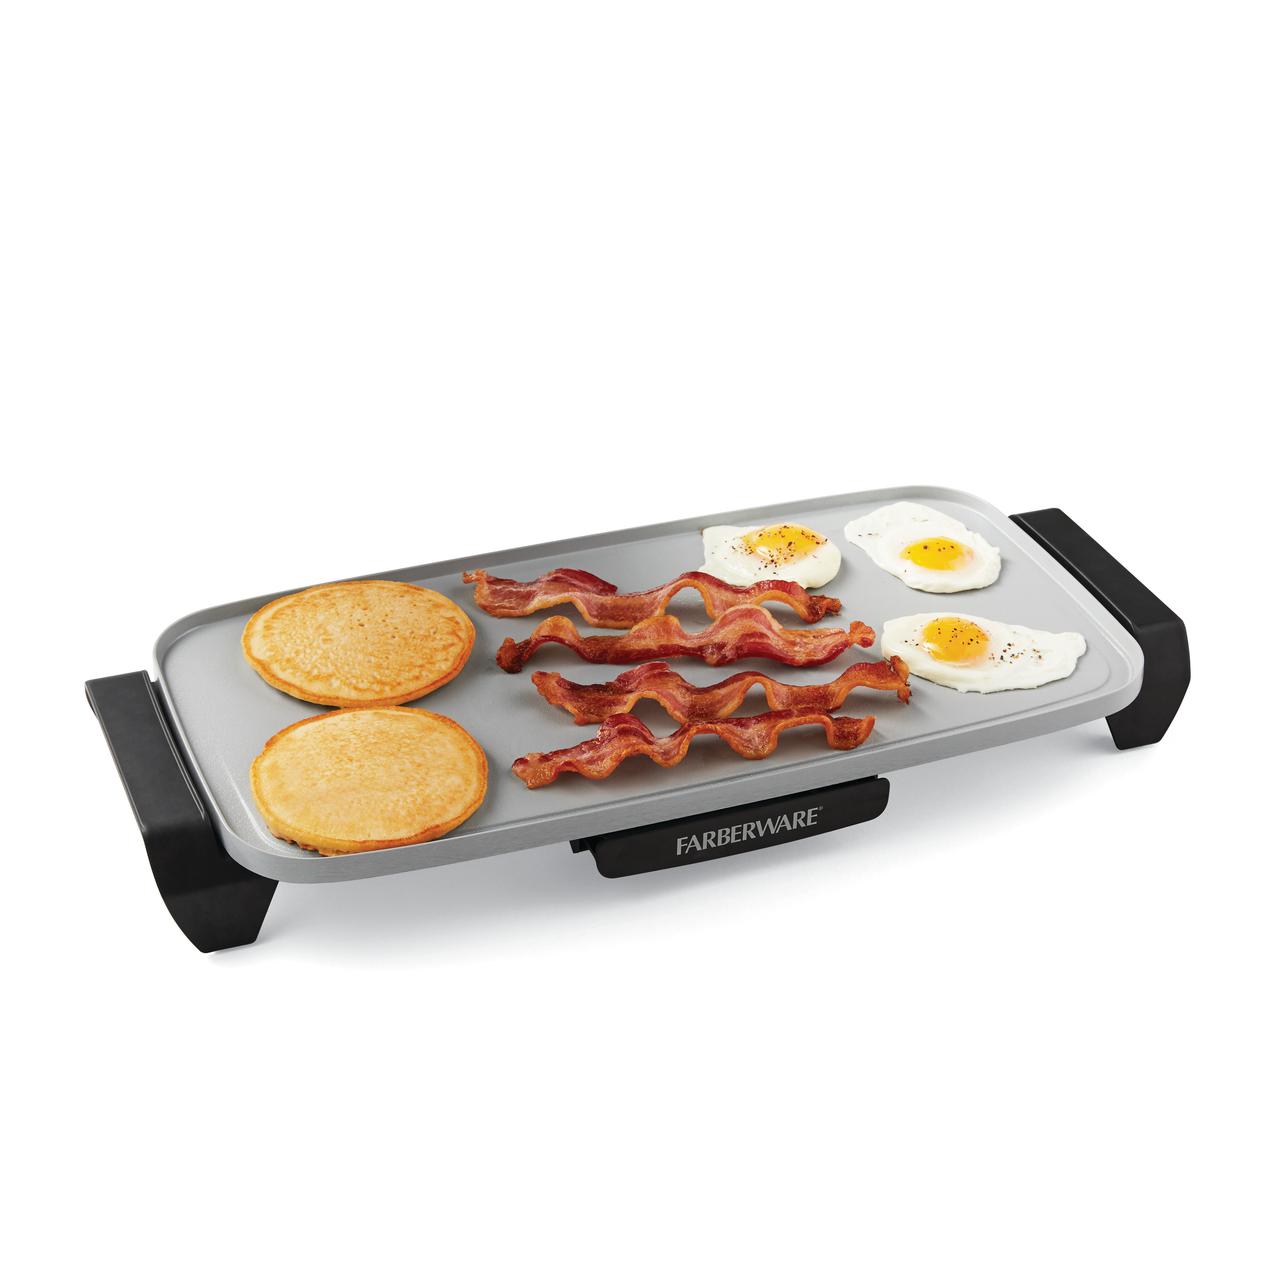 Farberware 10*20 inch Ceramic Coating Griddle, Gray, Nonstick, New - image 1 of 5